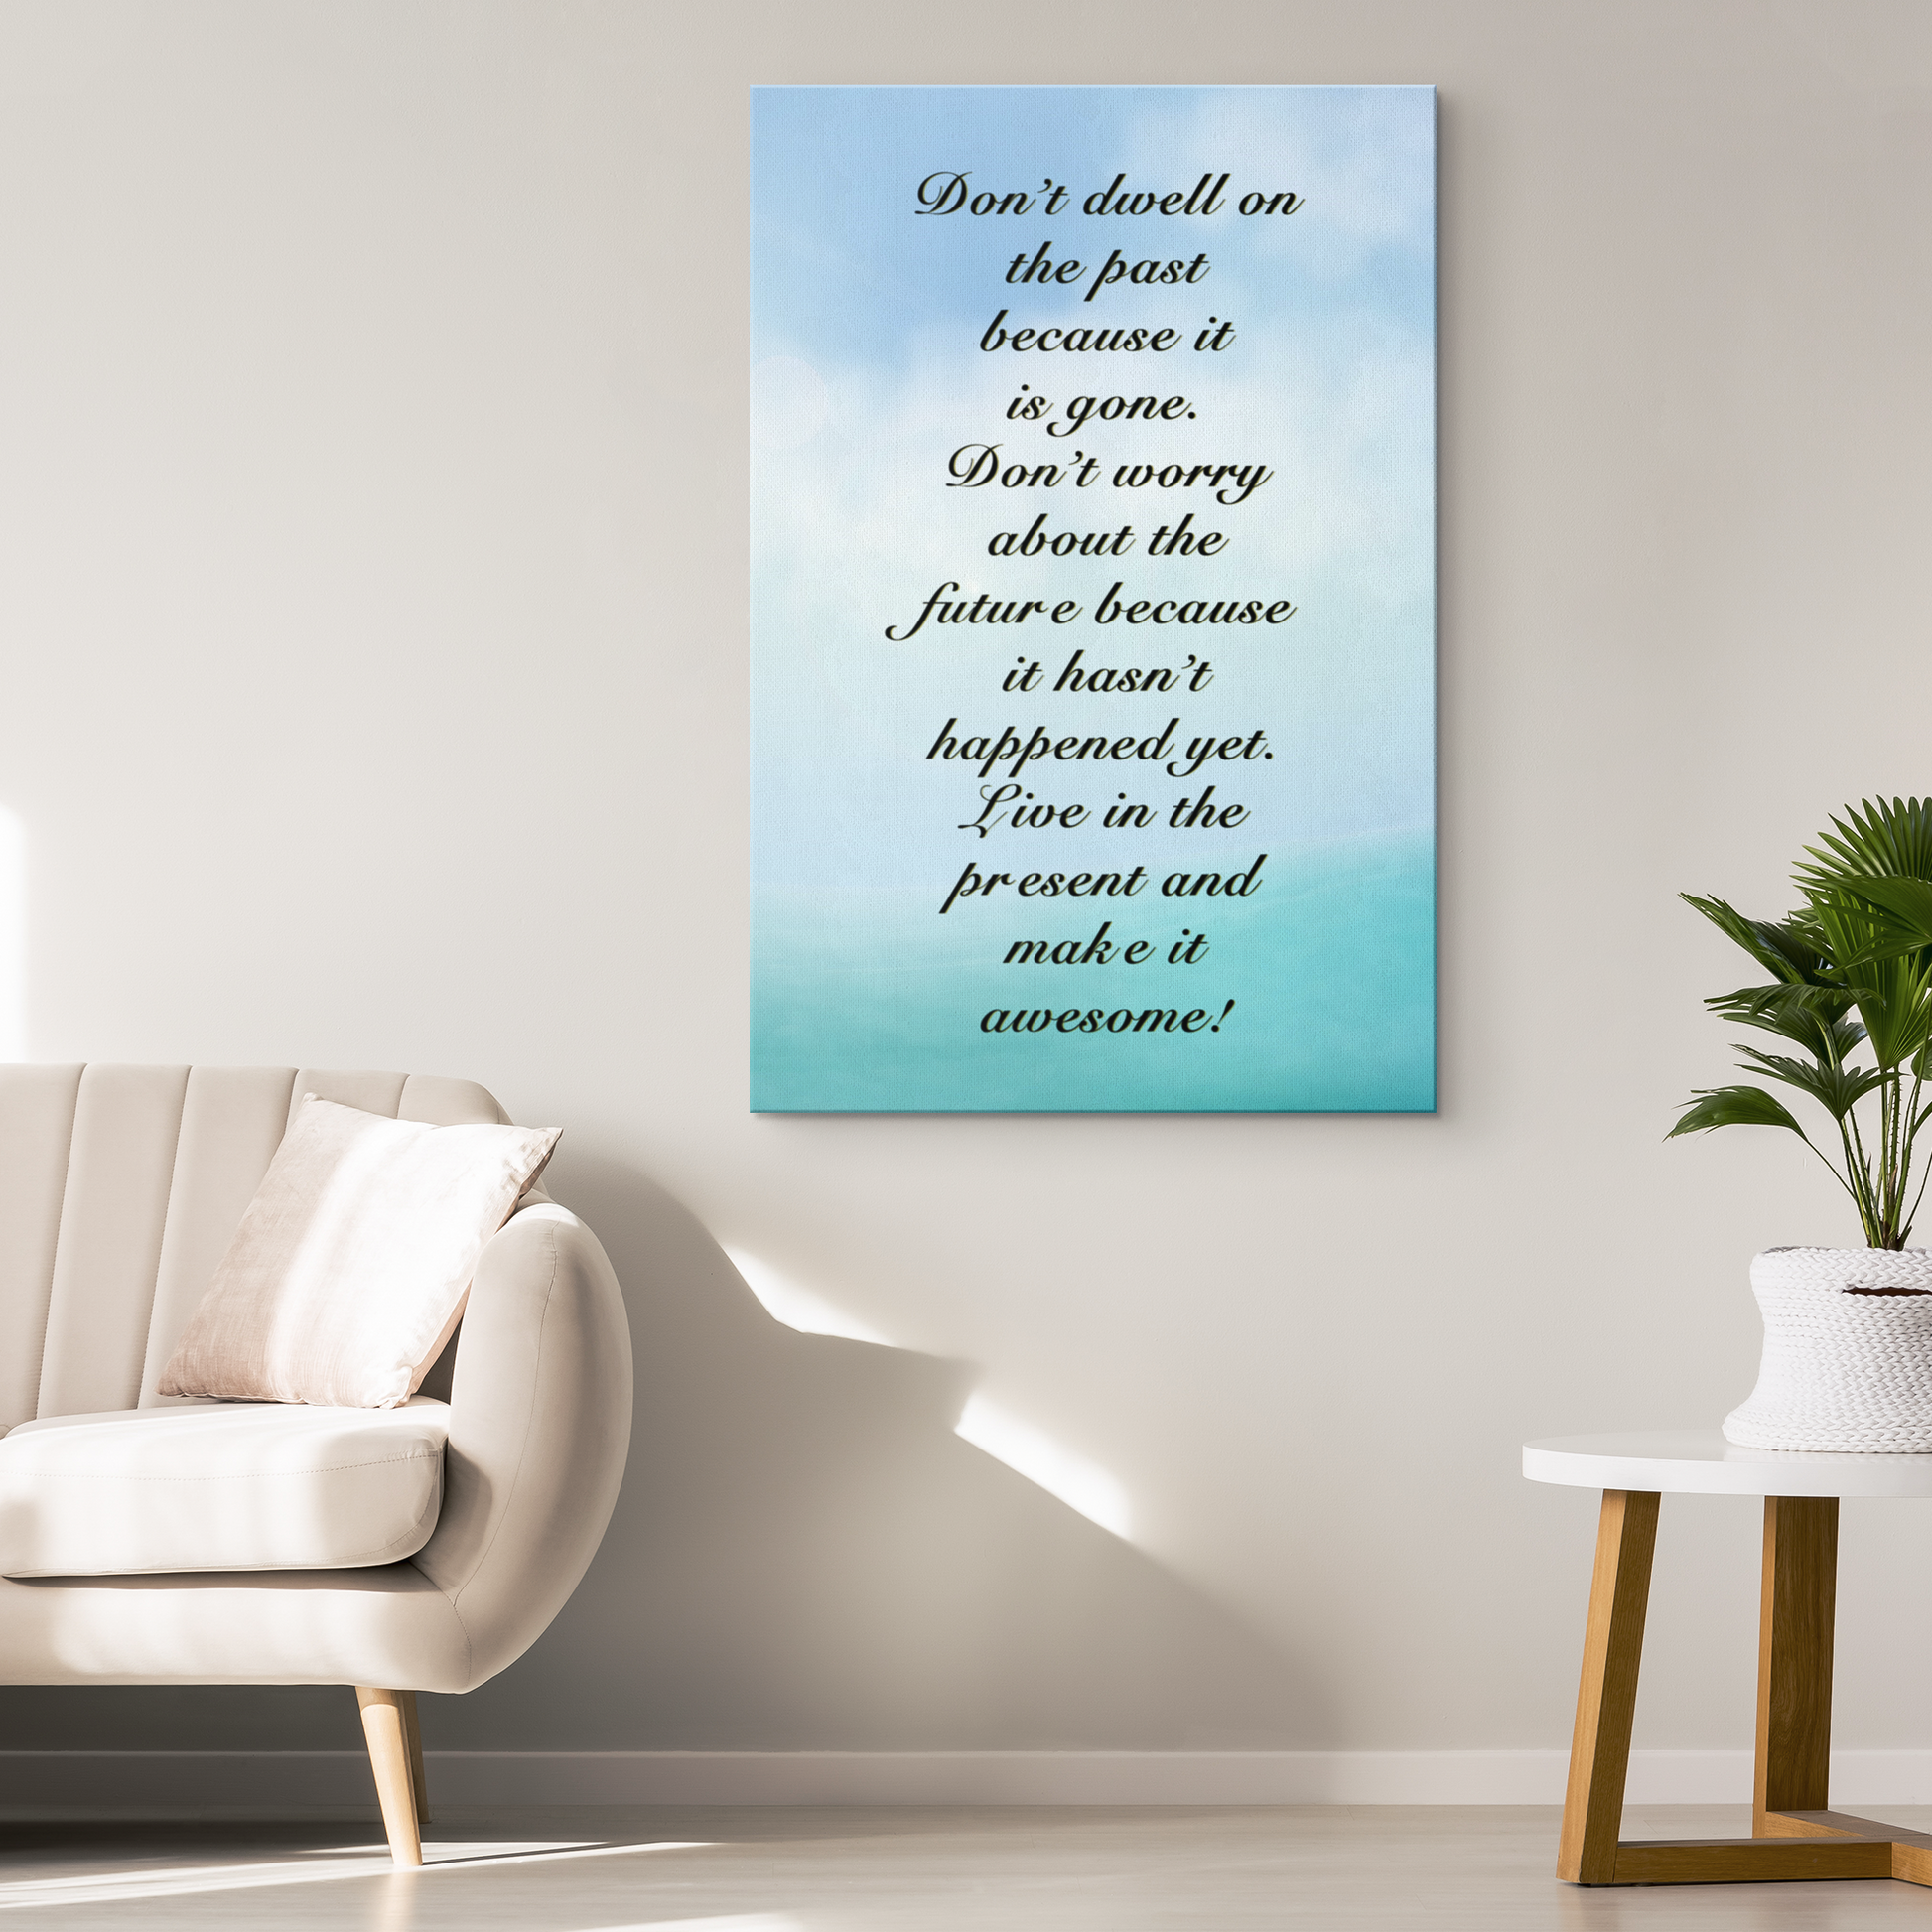 Canvas Wall Art With Inspirational Quote - Omtheo Gifts